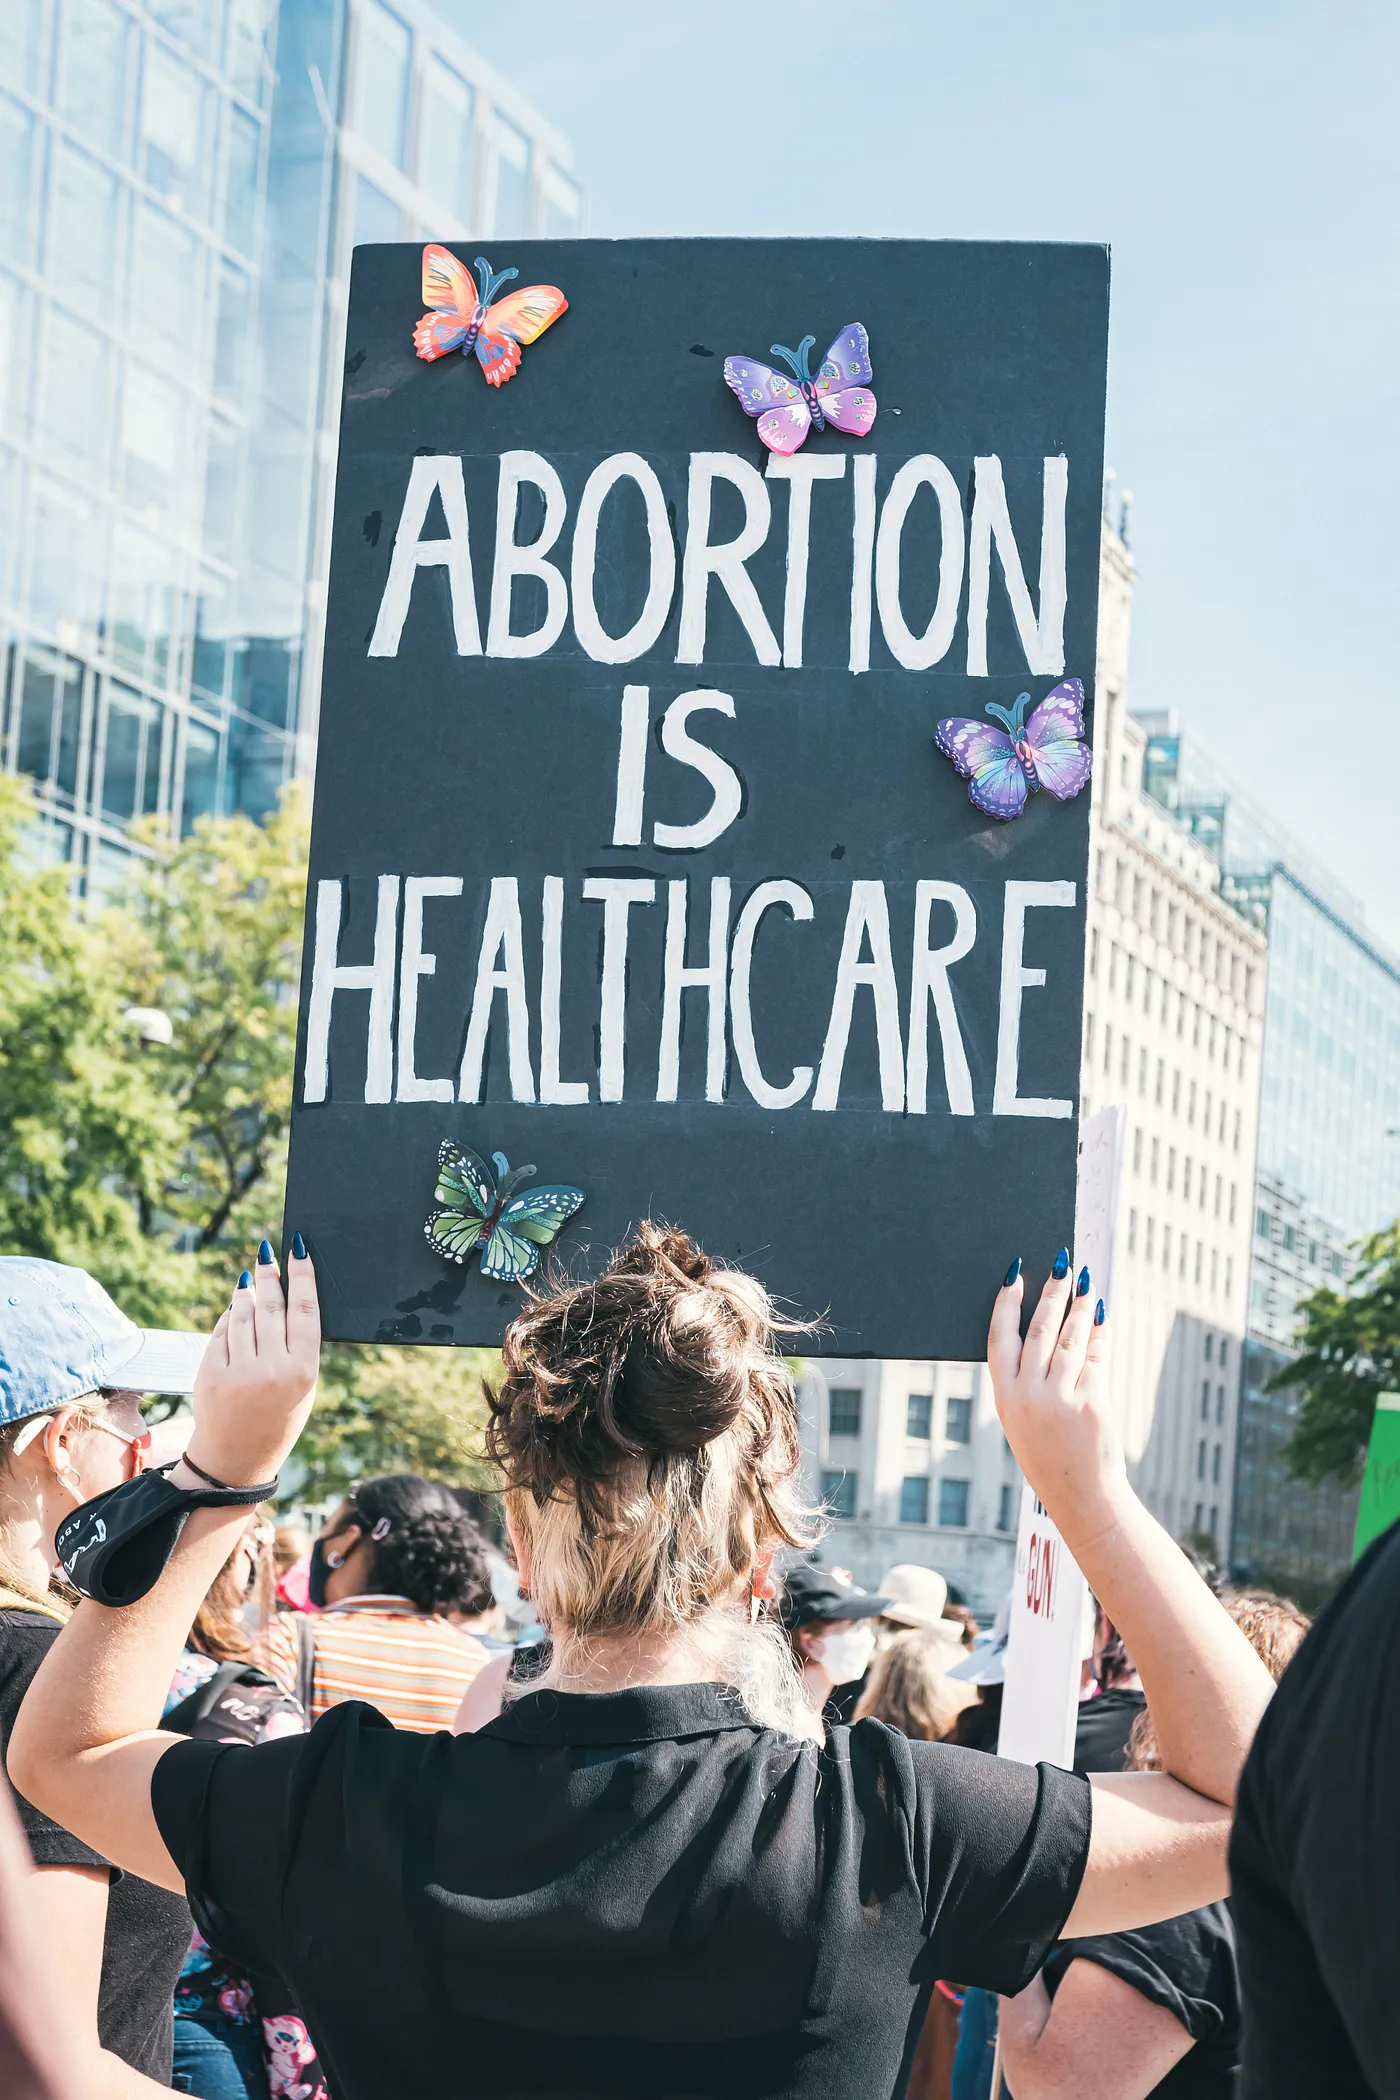 a woman holding a sign saying "abortion is healthcare"